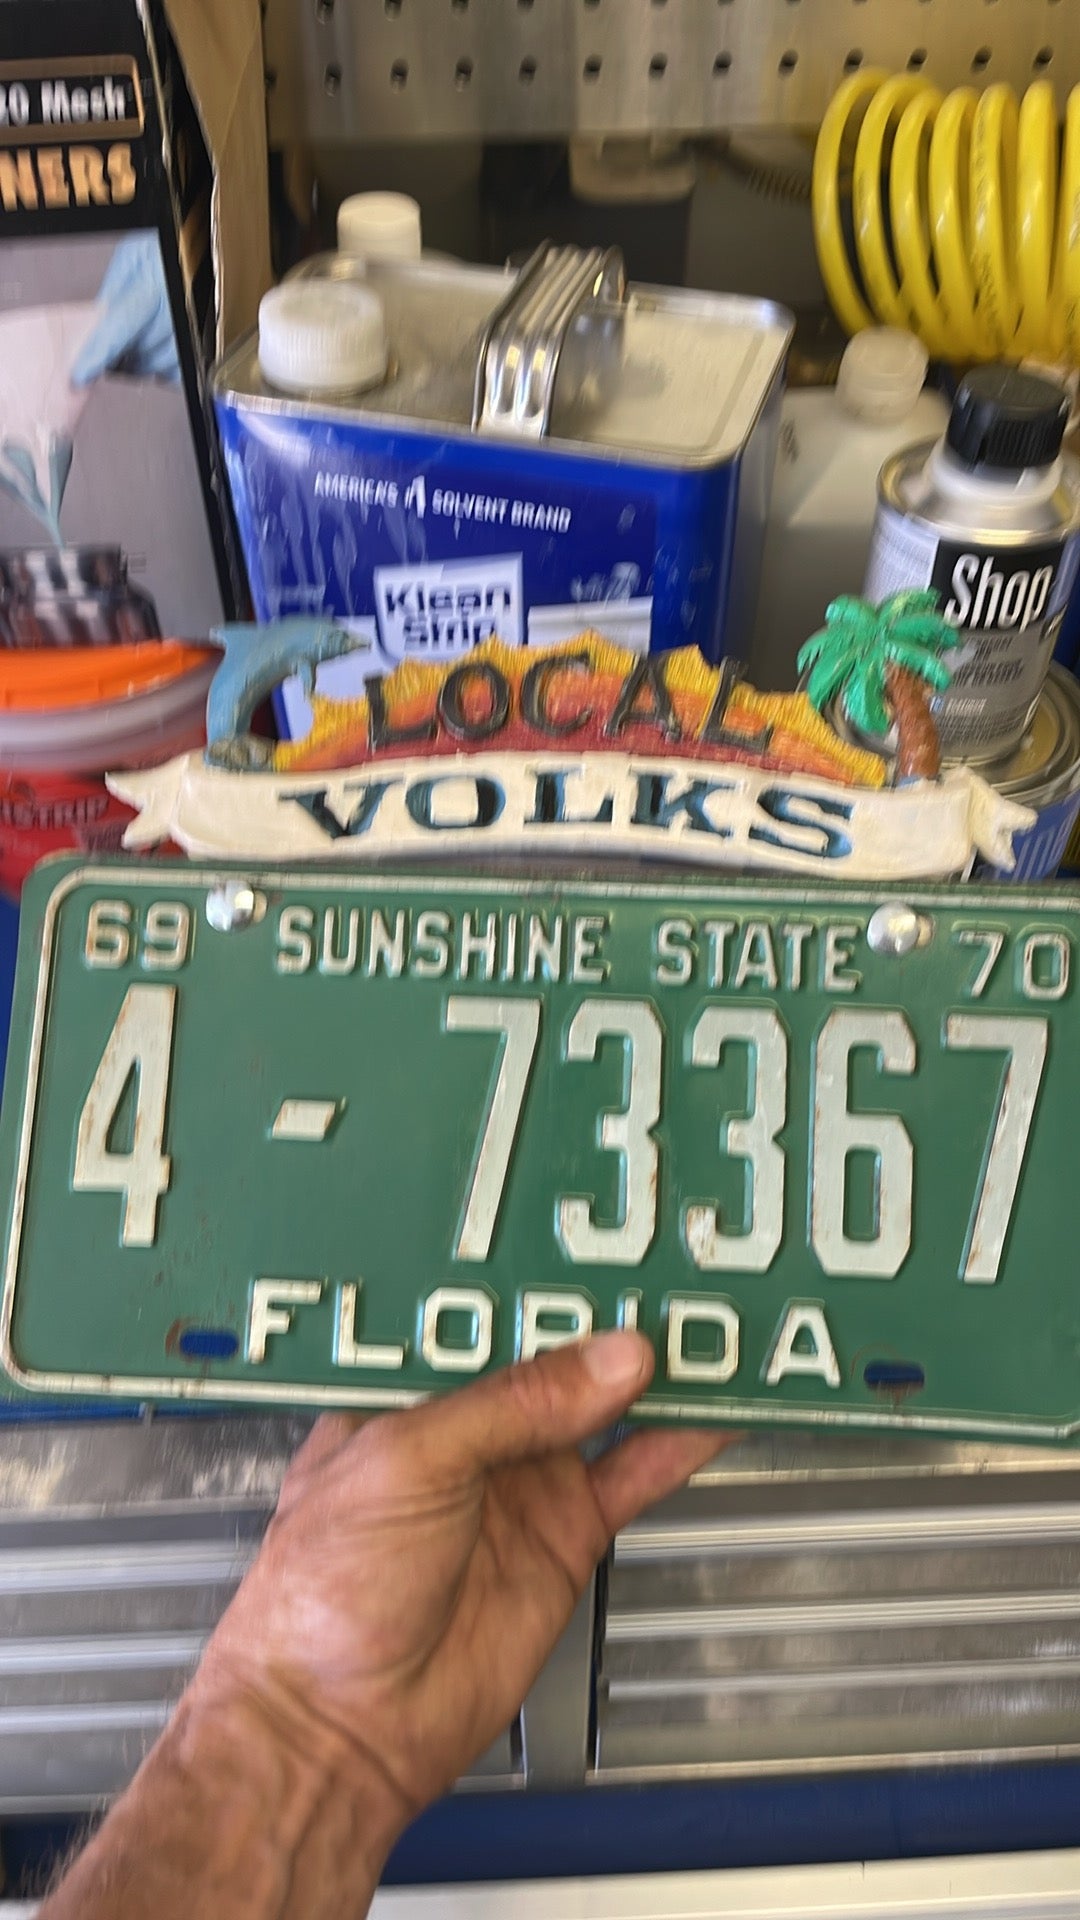 Local Volks Plate toppers